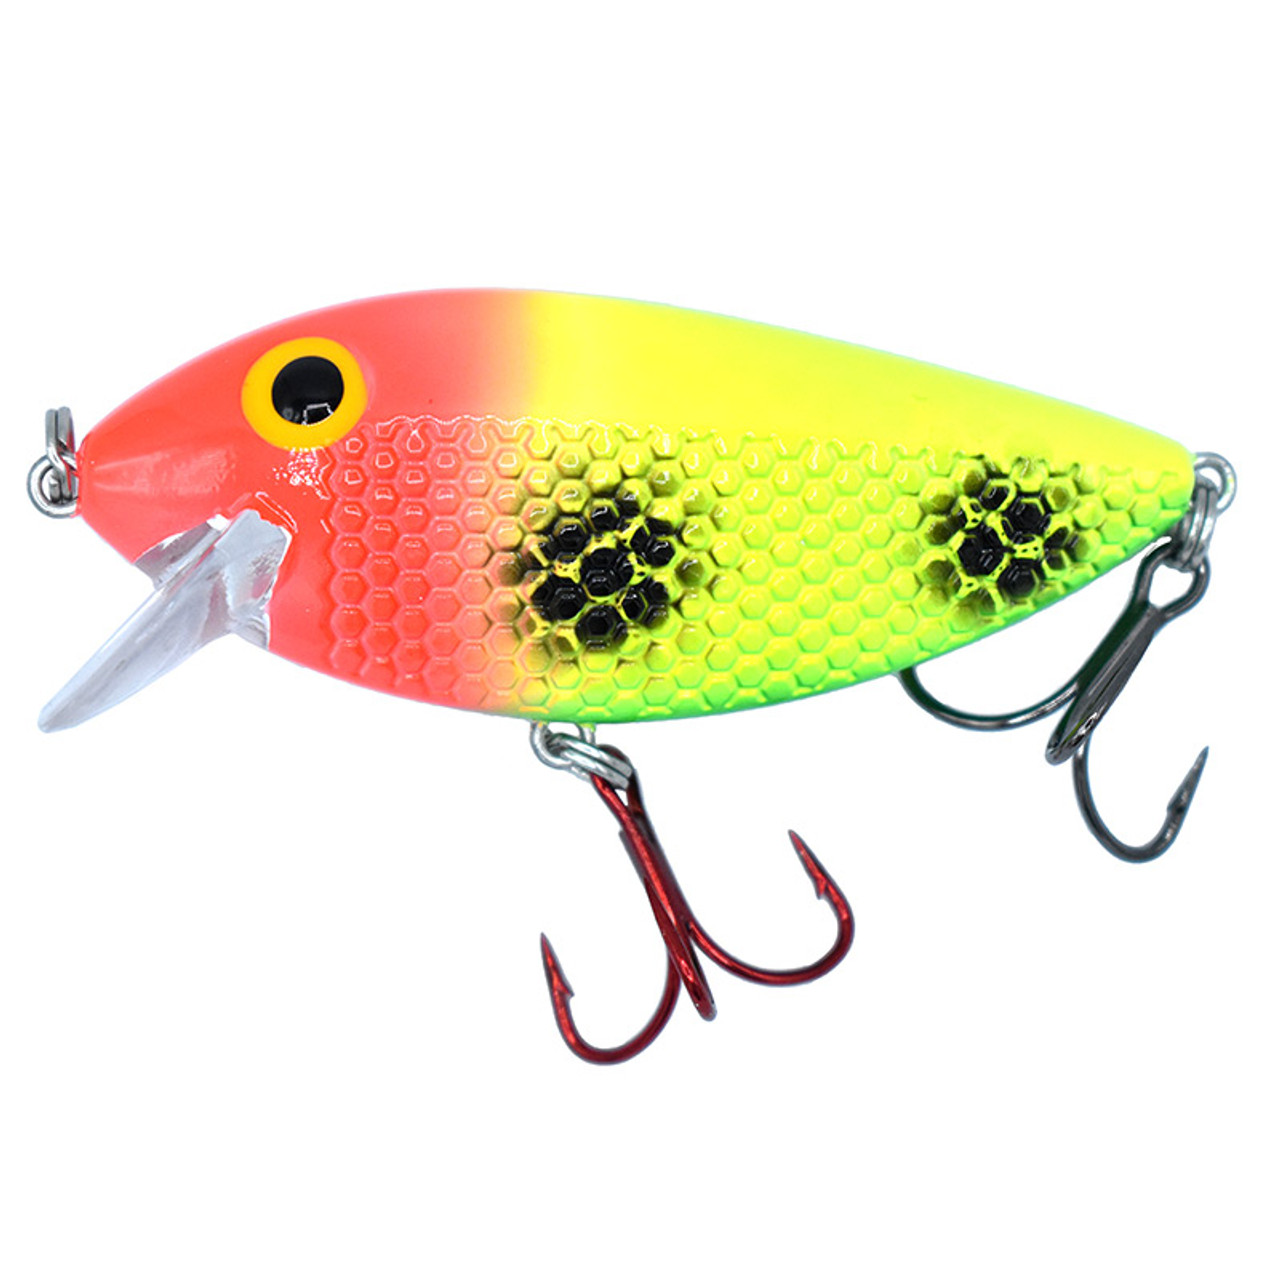 Killer Fish 2.5" Rattling Shallow Diving Crankbait by Ice Strong